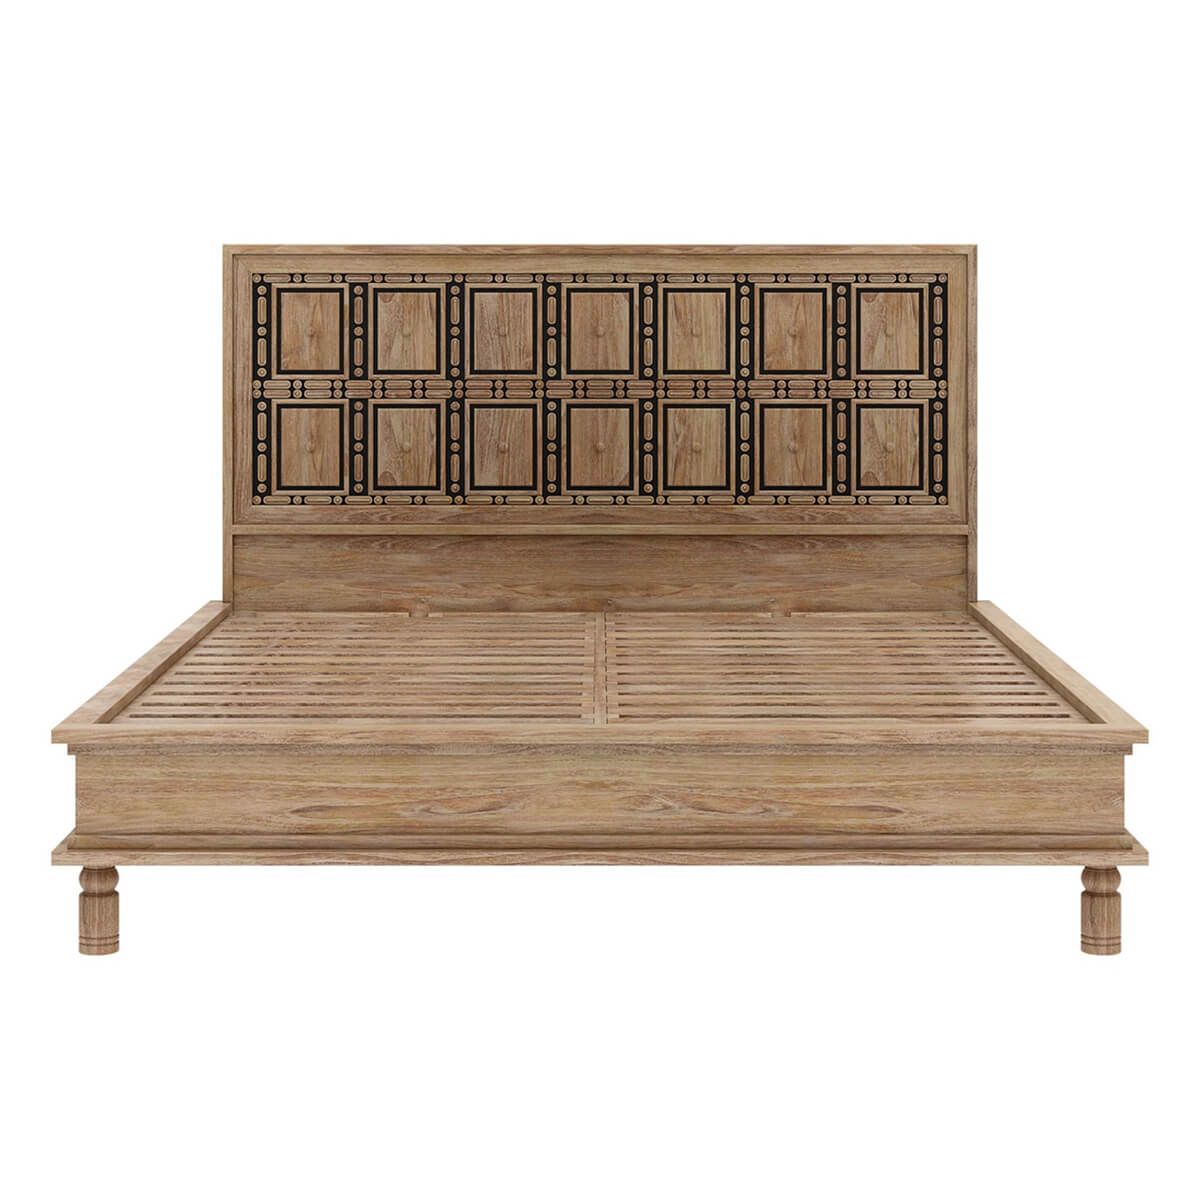 Handmade Solid Wood Traditional Platform Bed | Hand-carved Bed with Headboard Beds & Bed Frames - Bone Inlay Furnitures